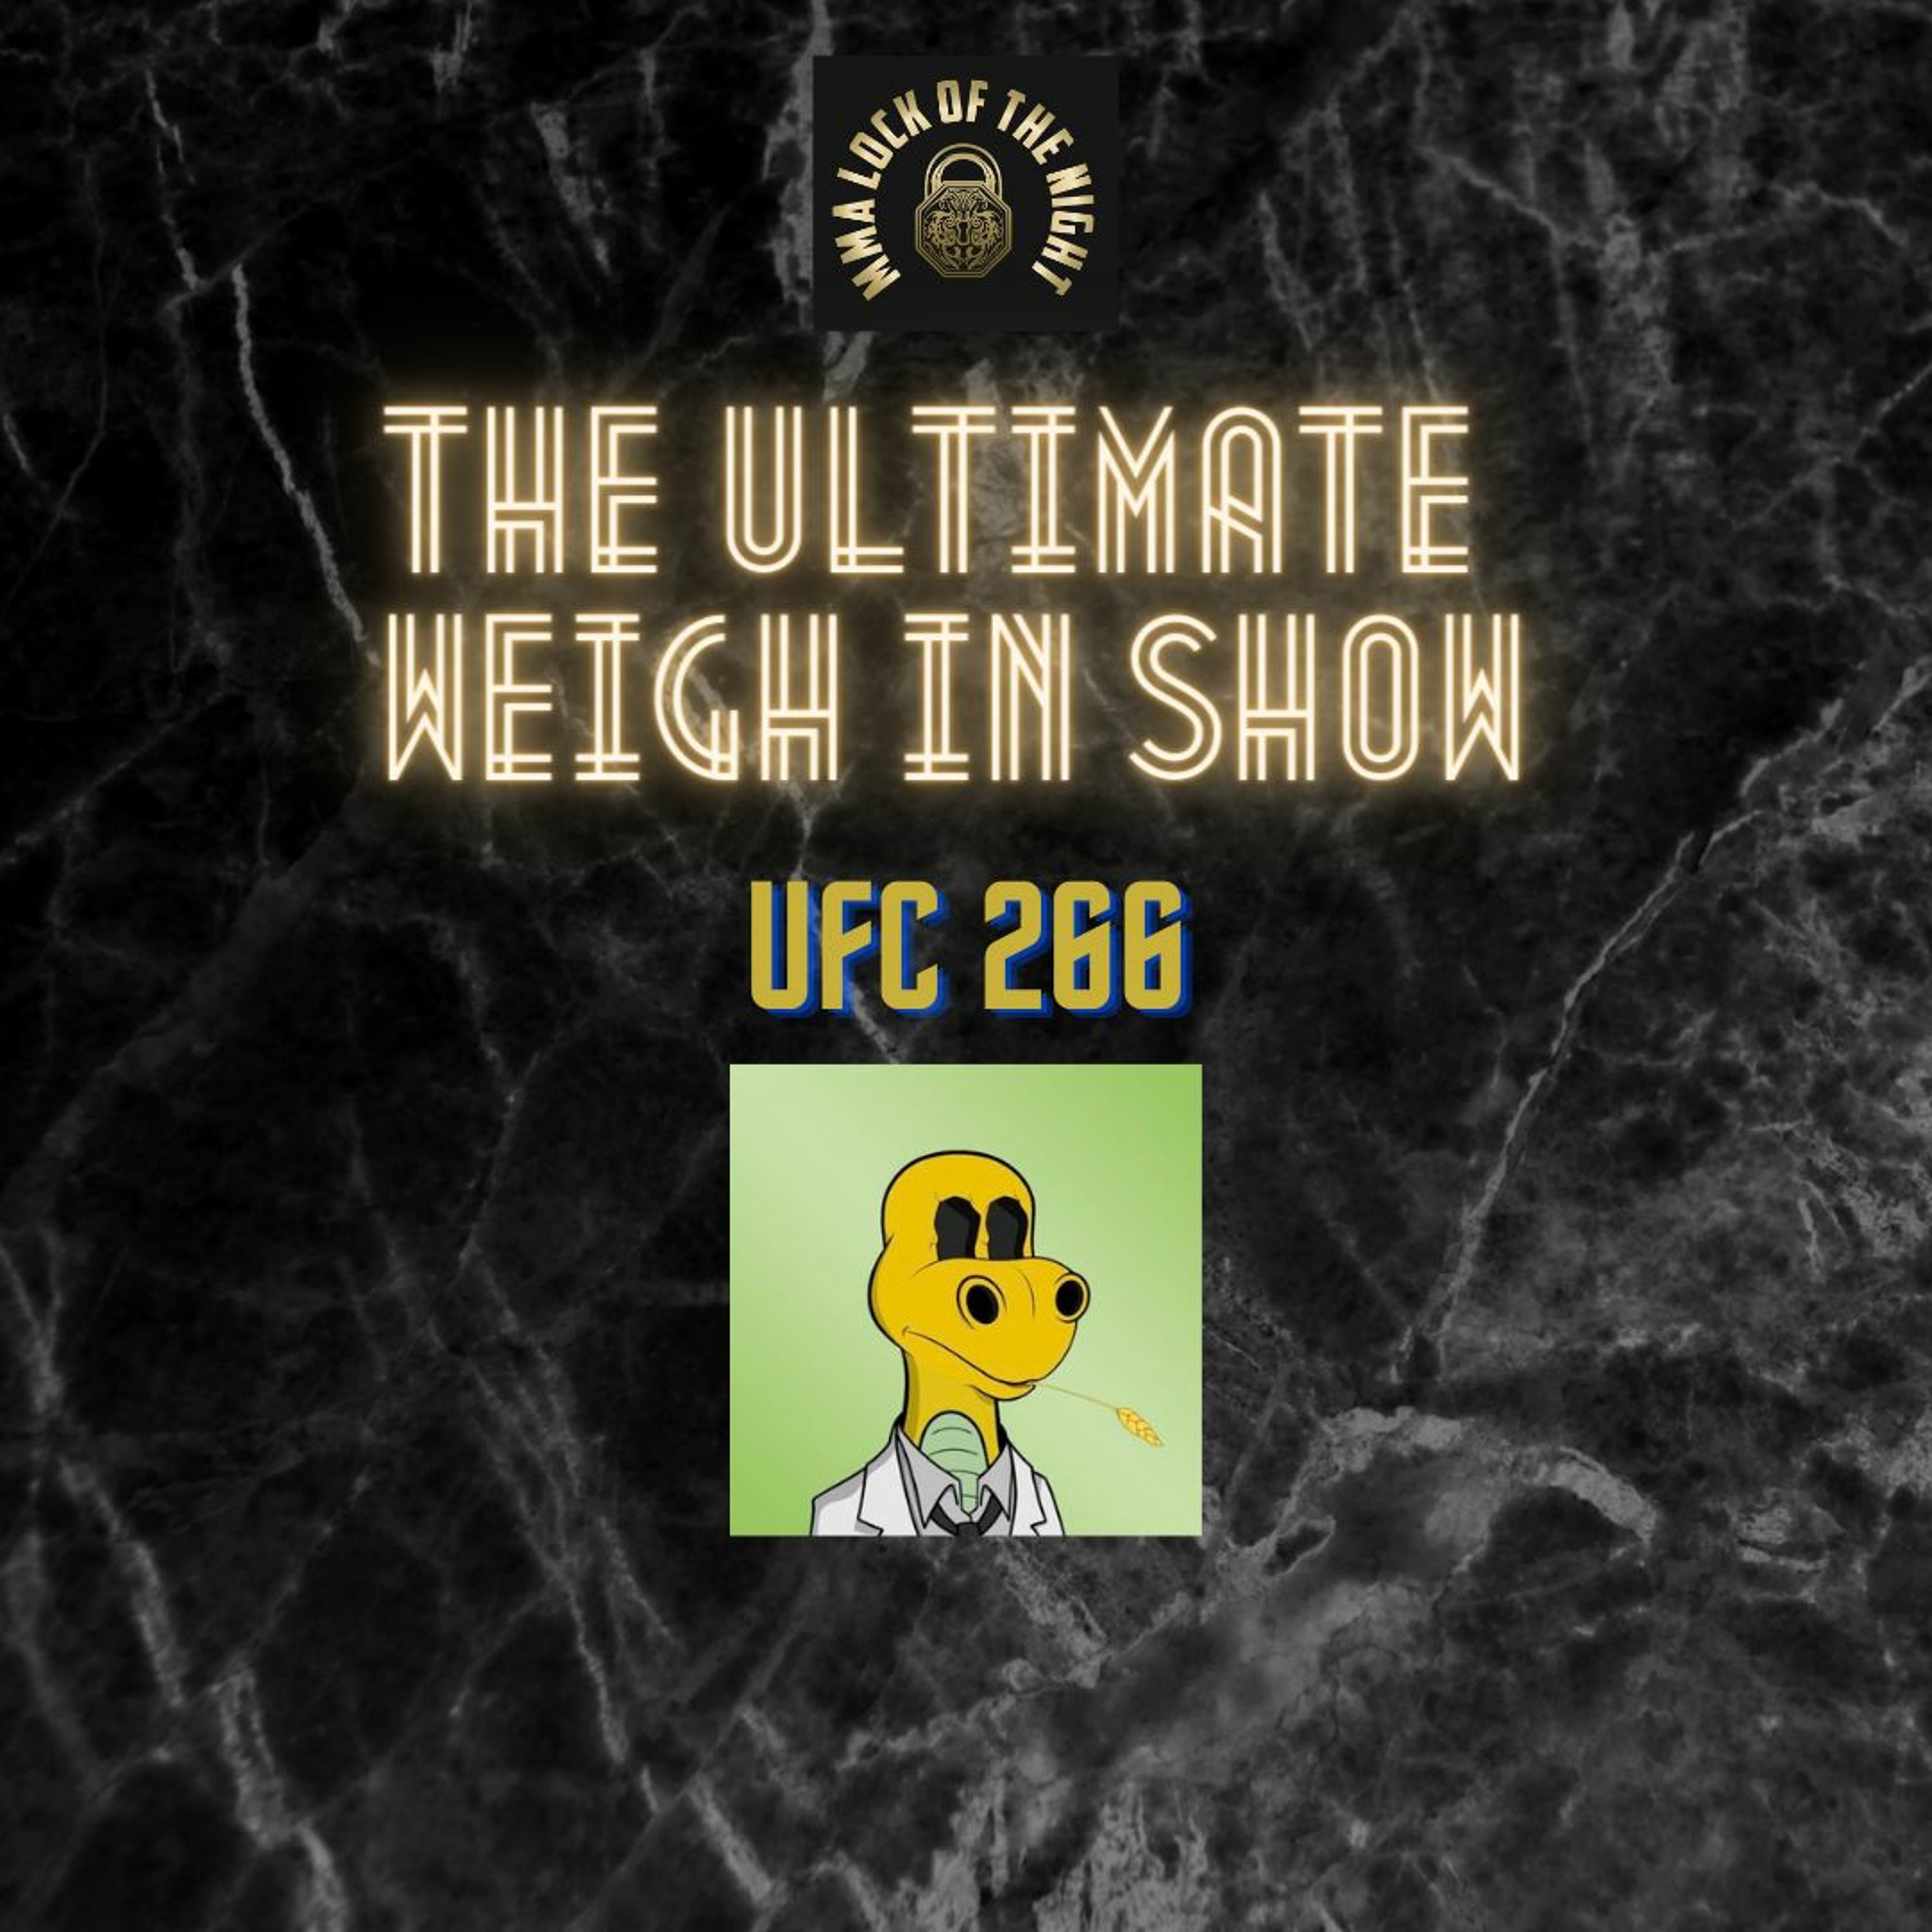 UFC 266 Predictions & Betting Tips | The Ultimate Weigh In Show w/ Shawn Orr